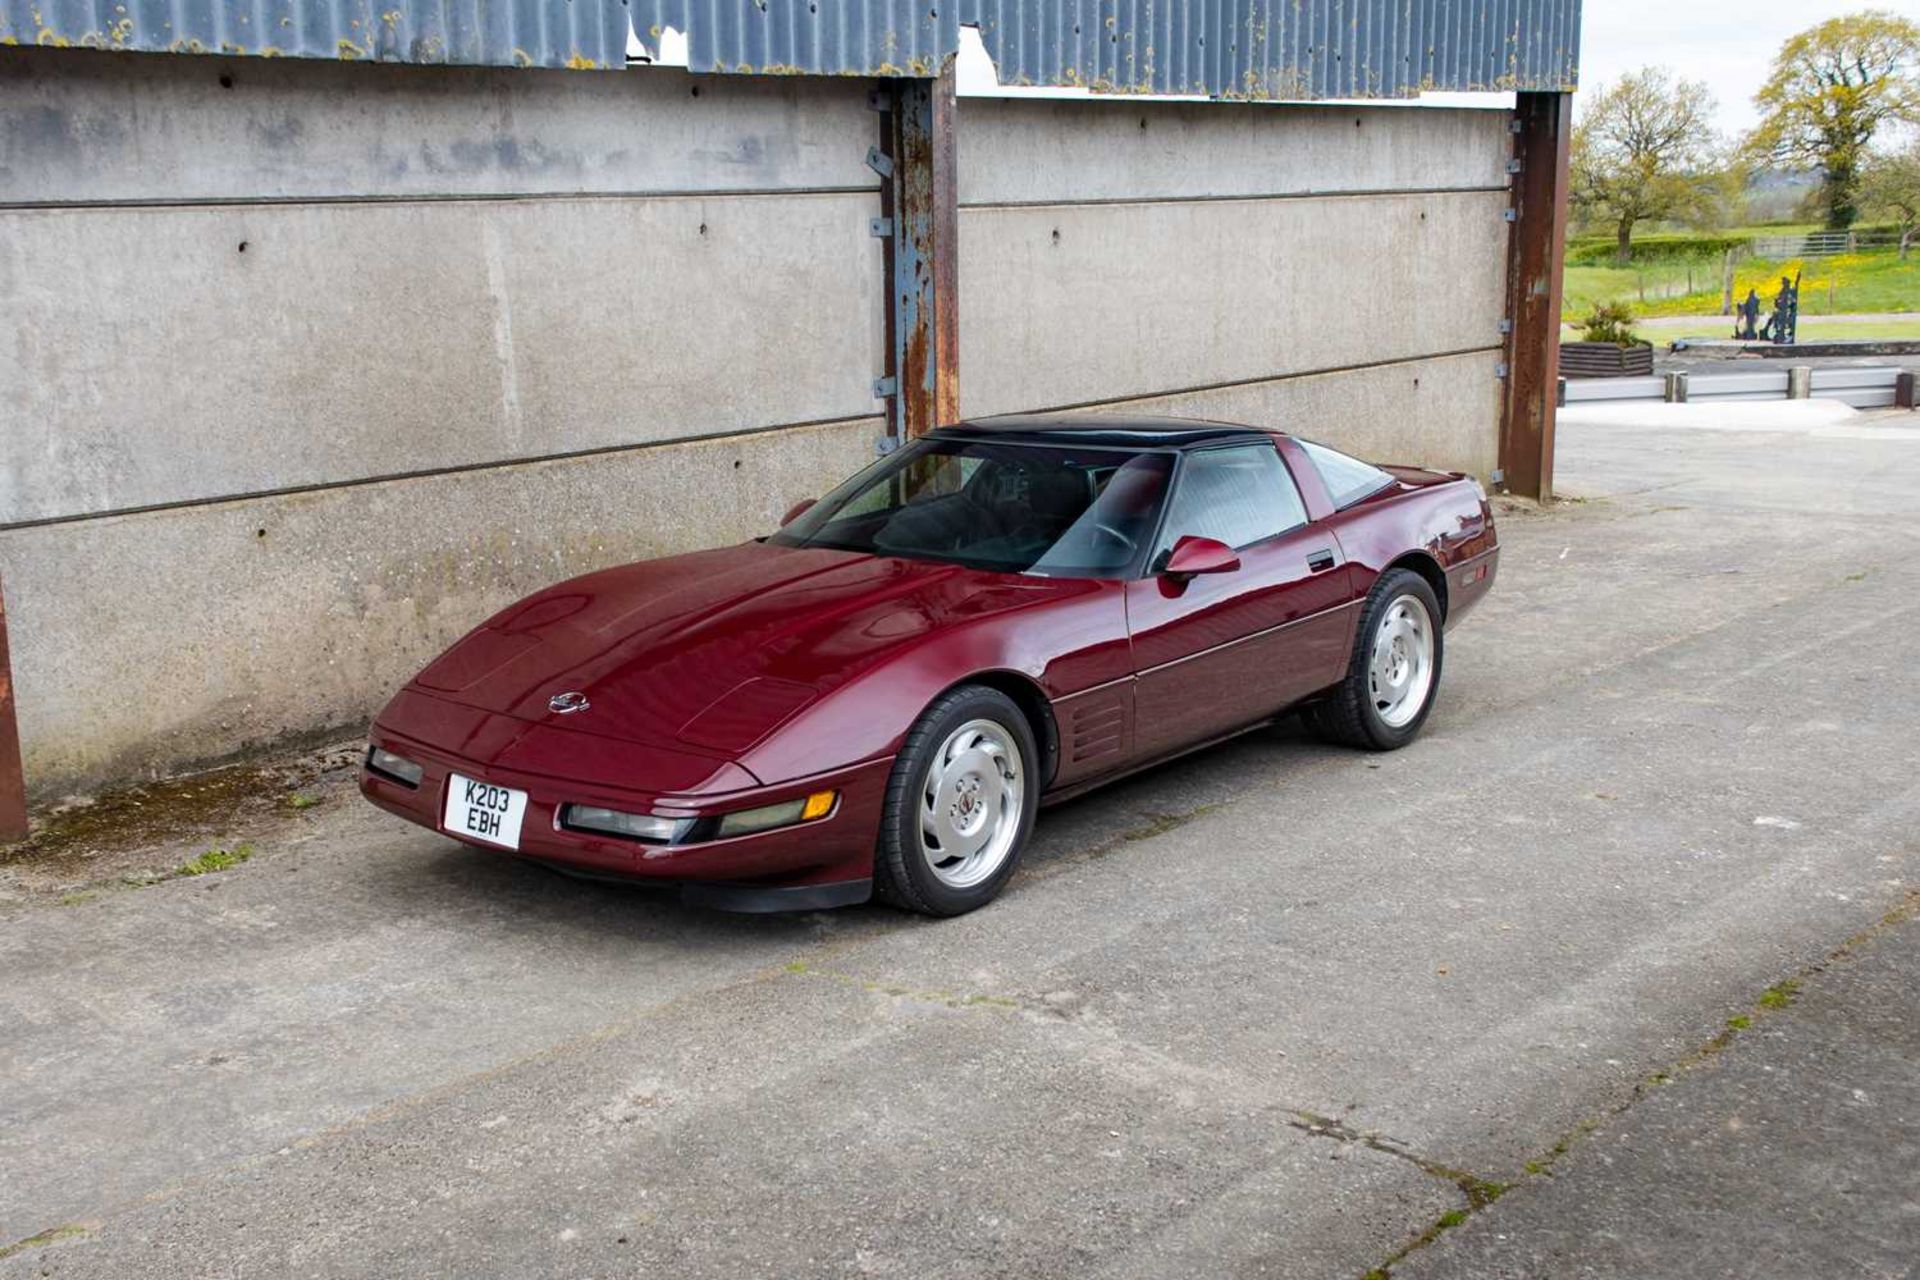 1993 Chevrolet Corvette C4  The highly sought-after 40th Anniversary Edition  - Image 11 of 78